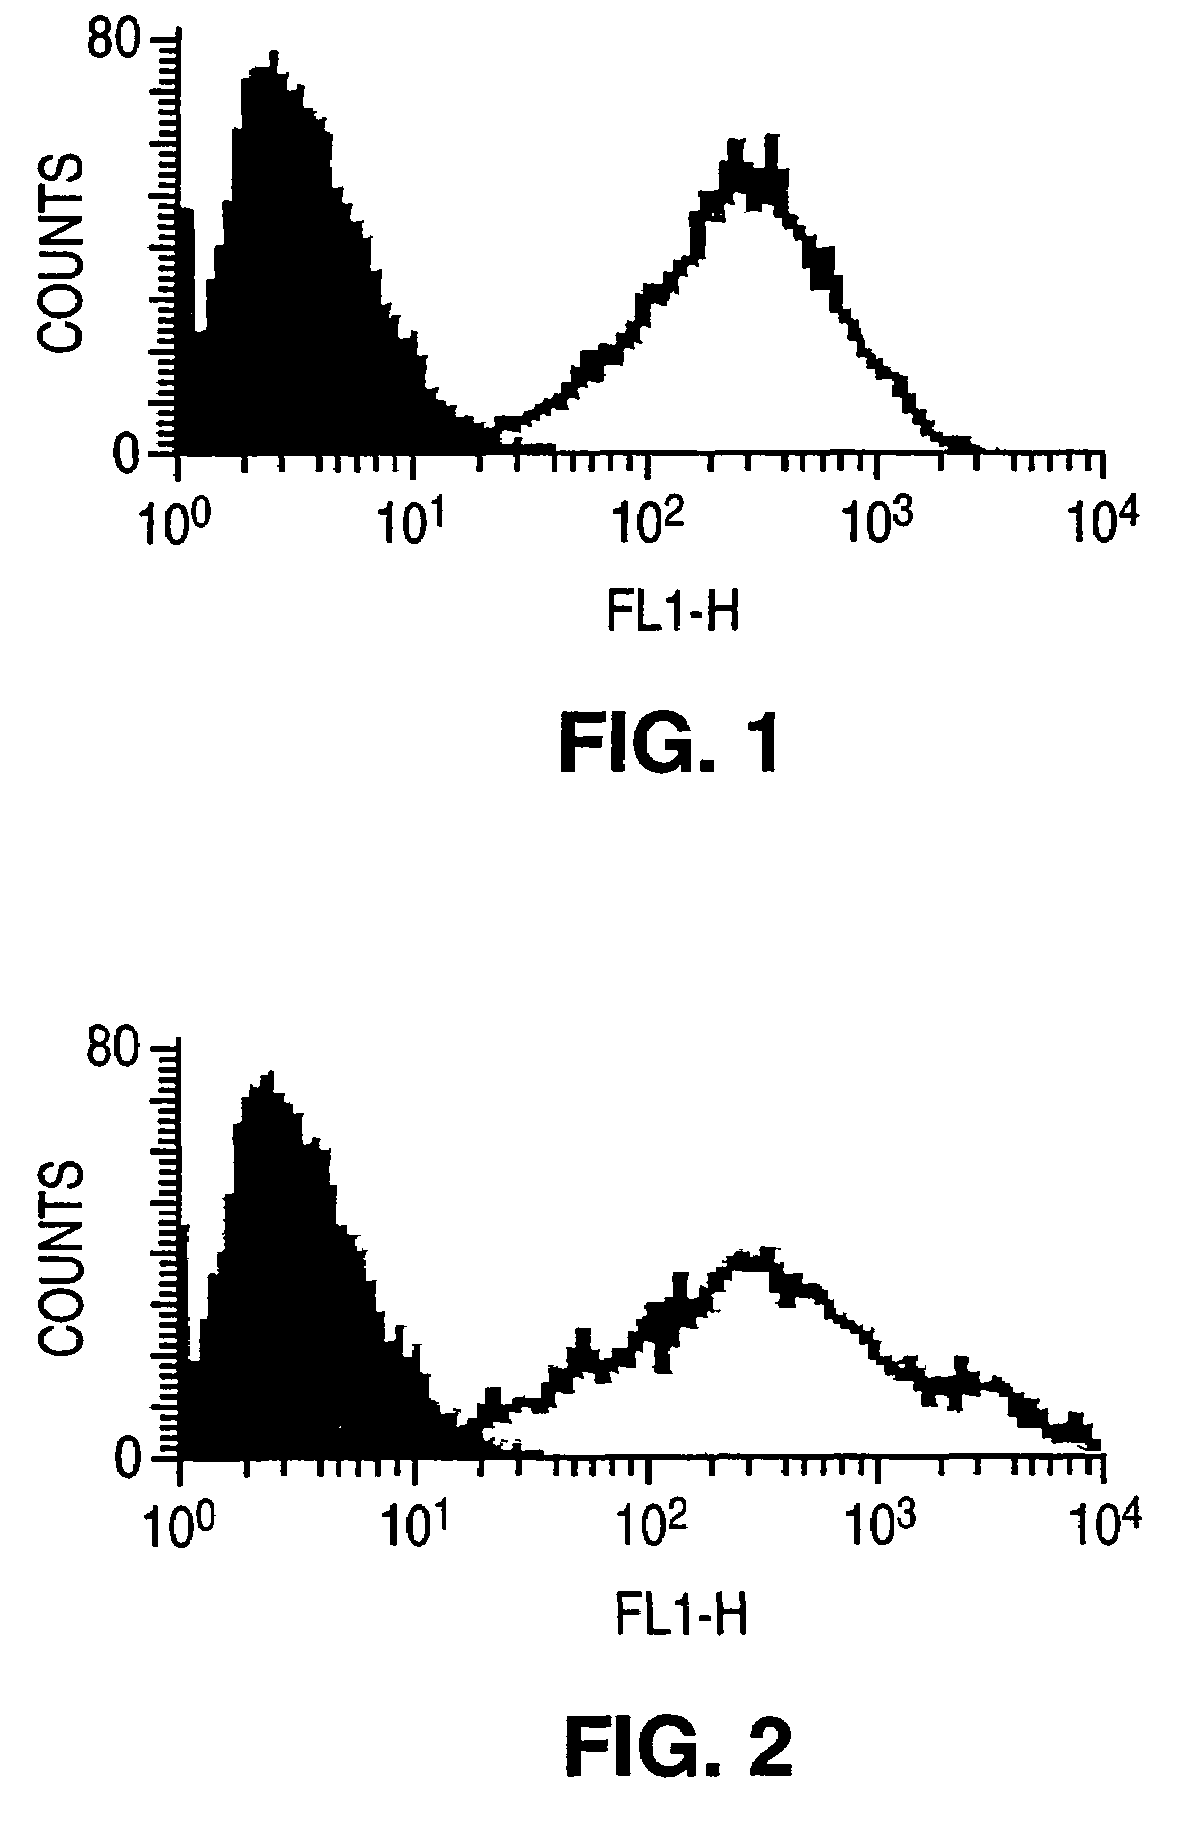 Anti-tumor antibody compositions and methods of use